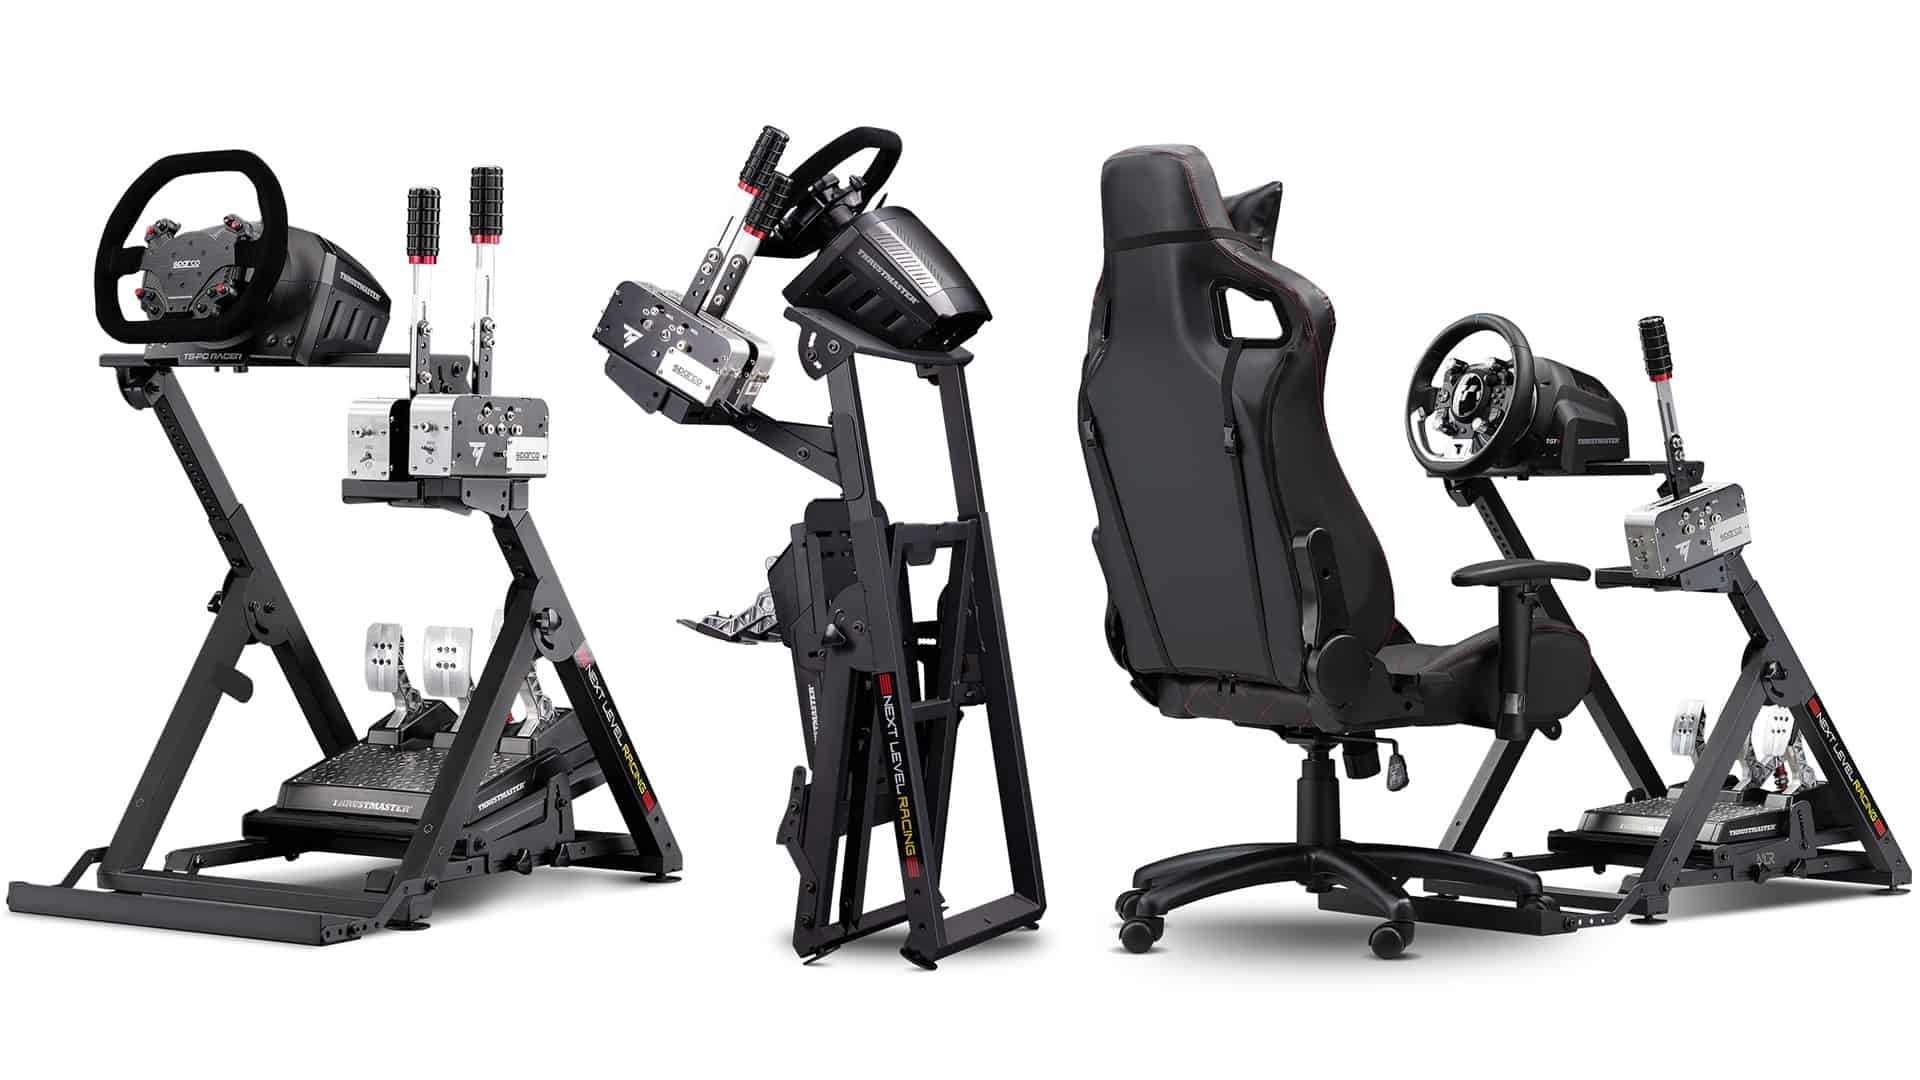 Next Level Racing Wheel Stand 2.0 announced | Traxion